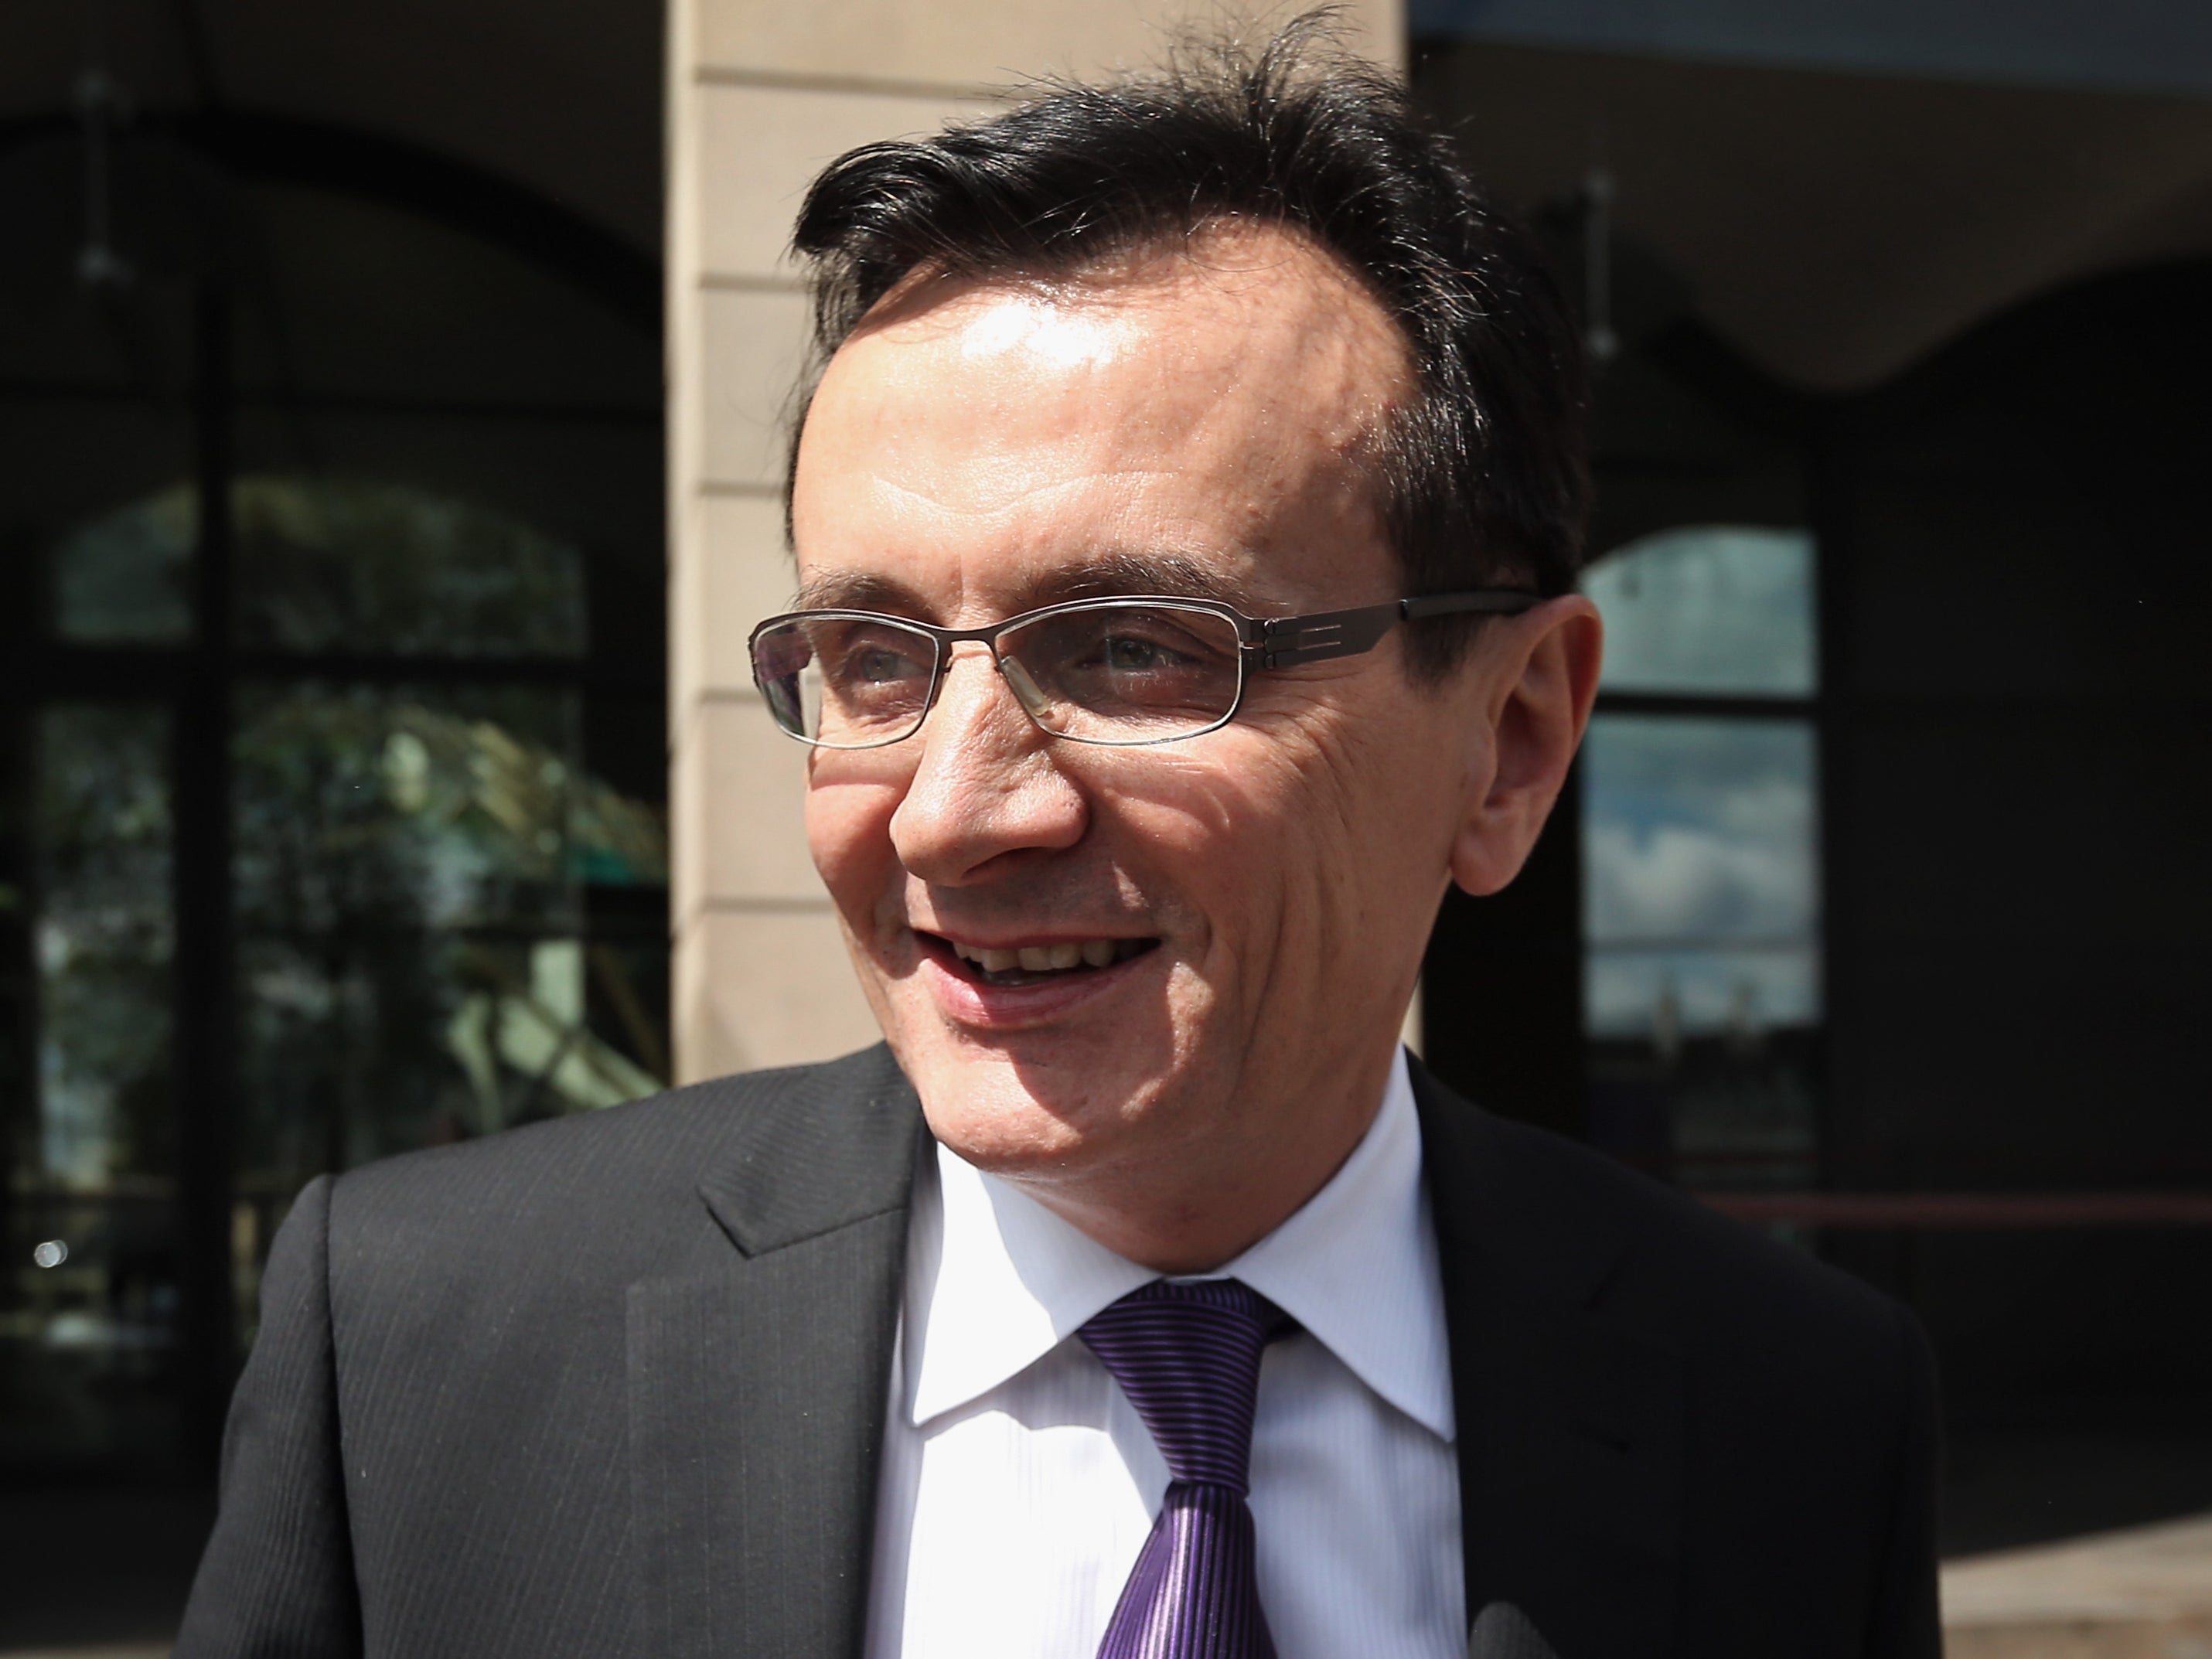 Pascal Soriot, the chief executive of AstraZeneca, has received a knighthood